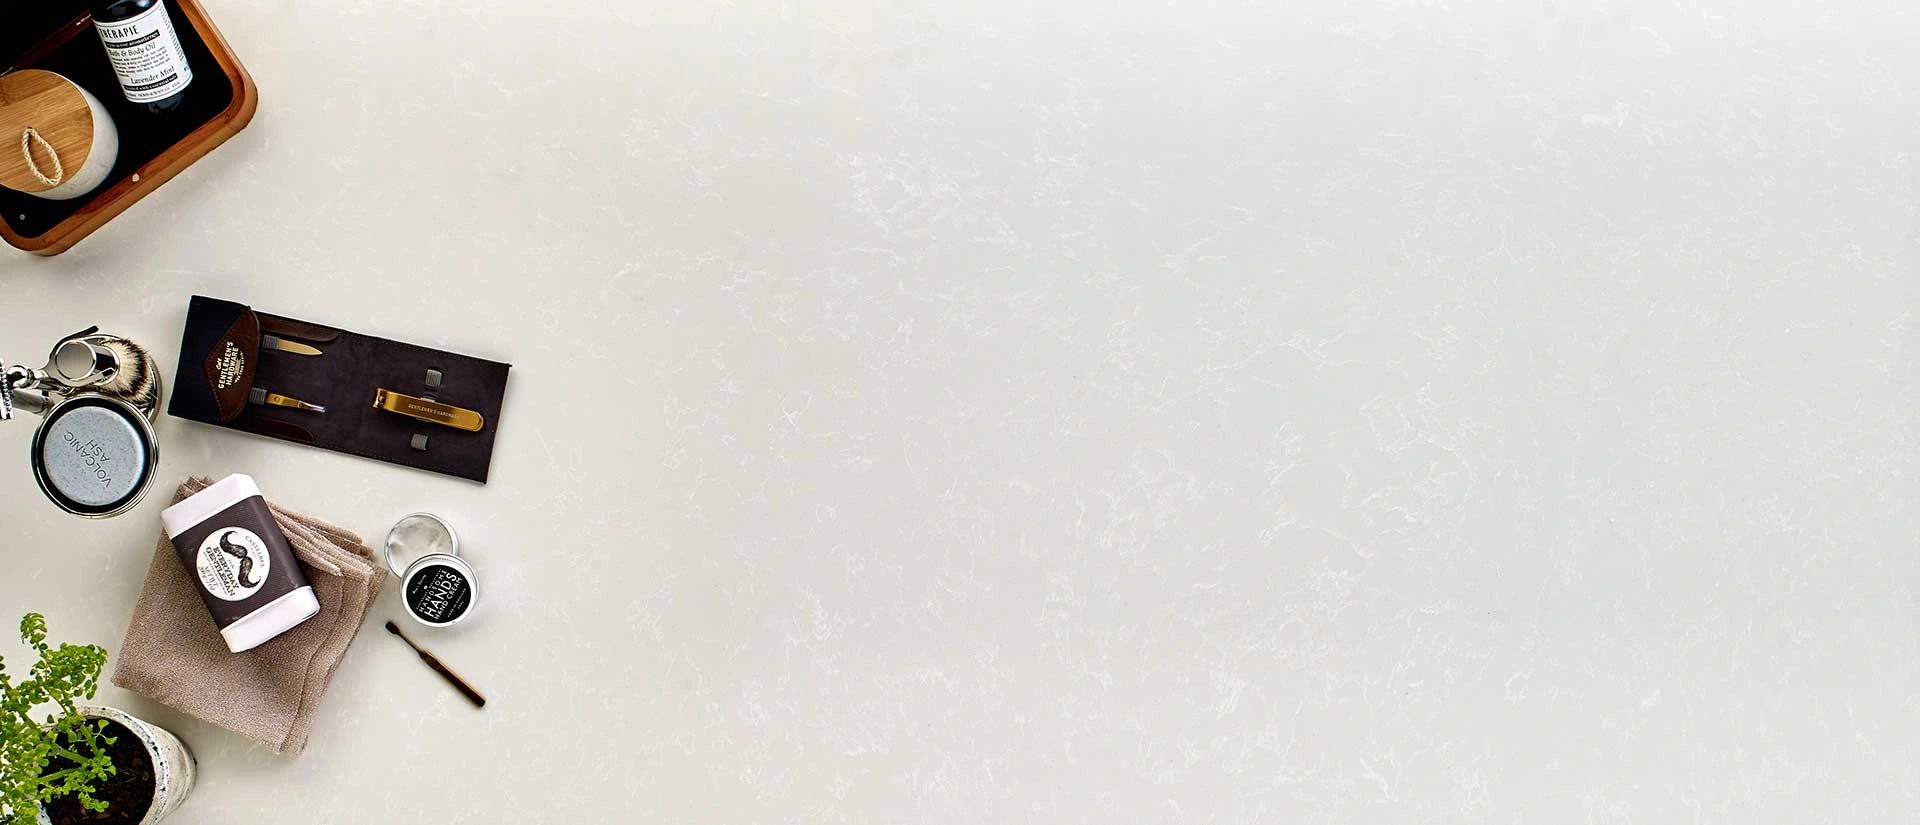  Shell White Quartz offers an unfussy natural look. With a dusty white background and light veining